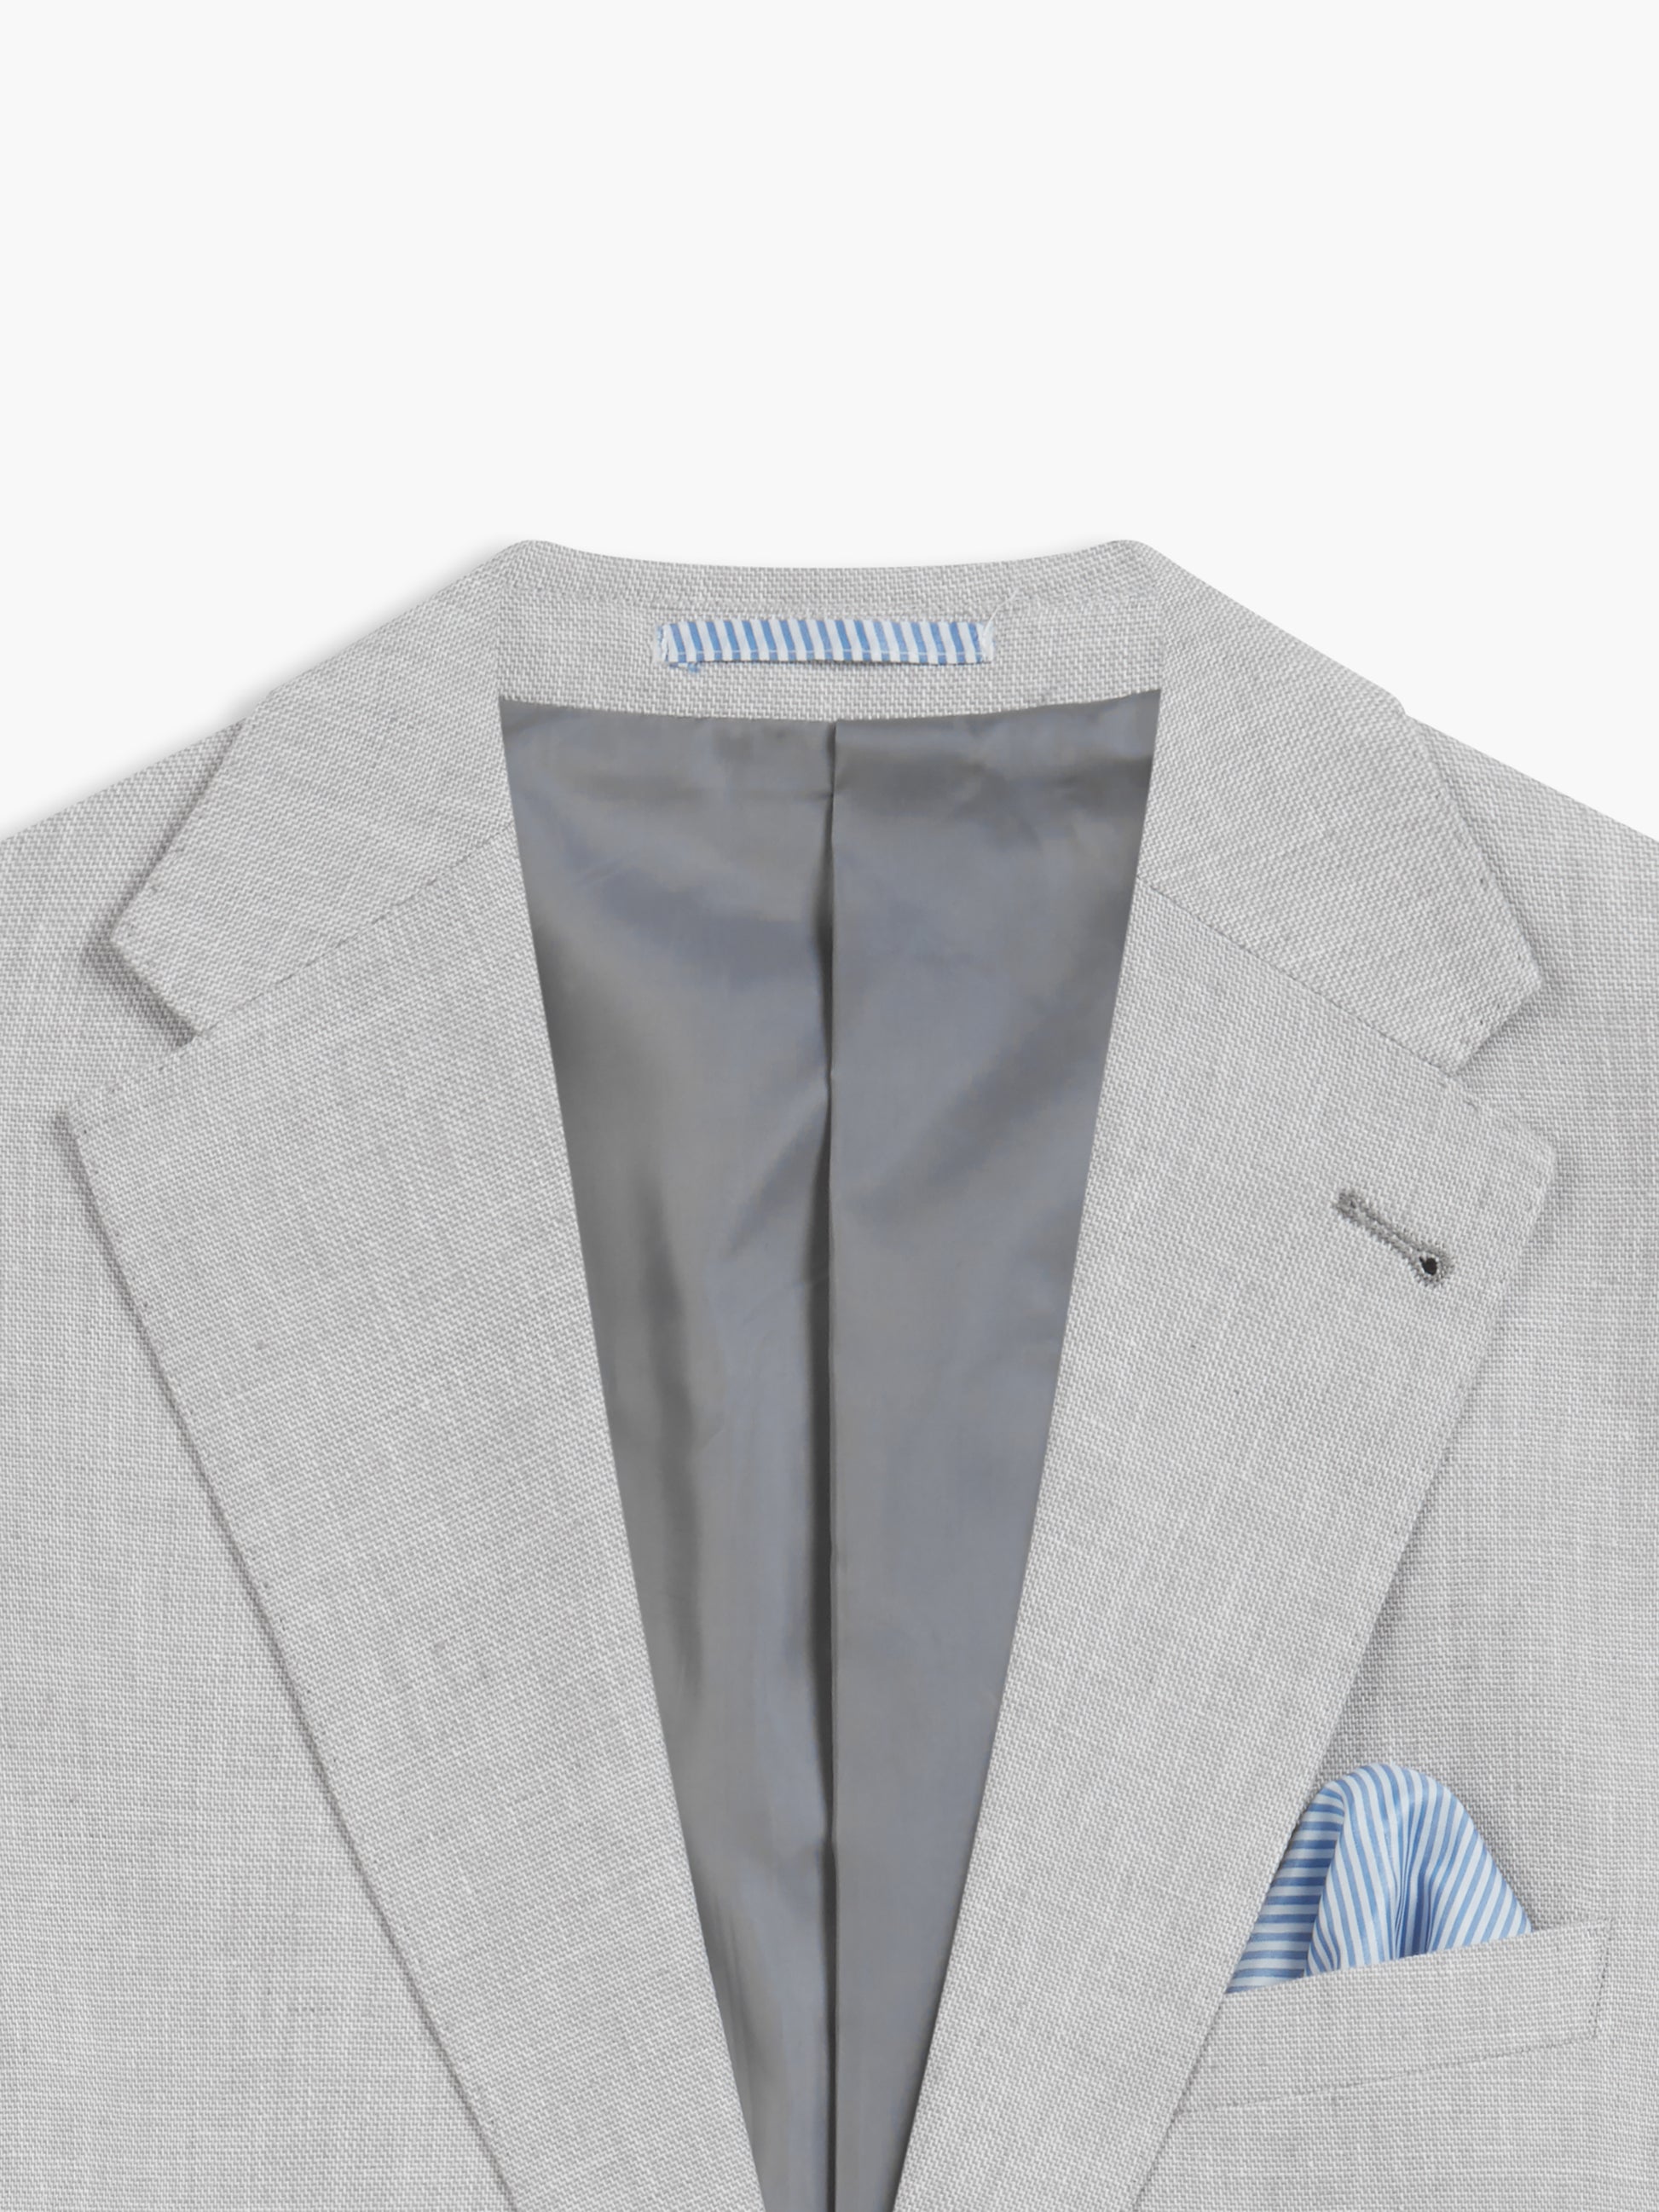 Image 8 of Slim Fit Single Breasted Linen Suit Jacket in Light Grey